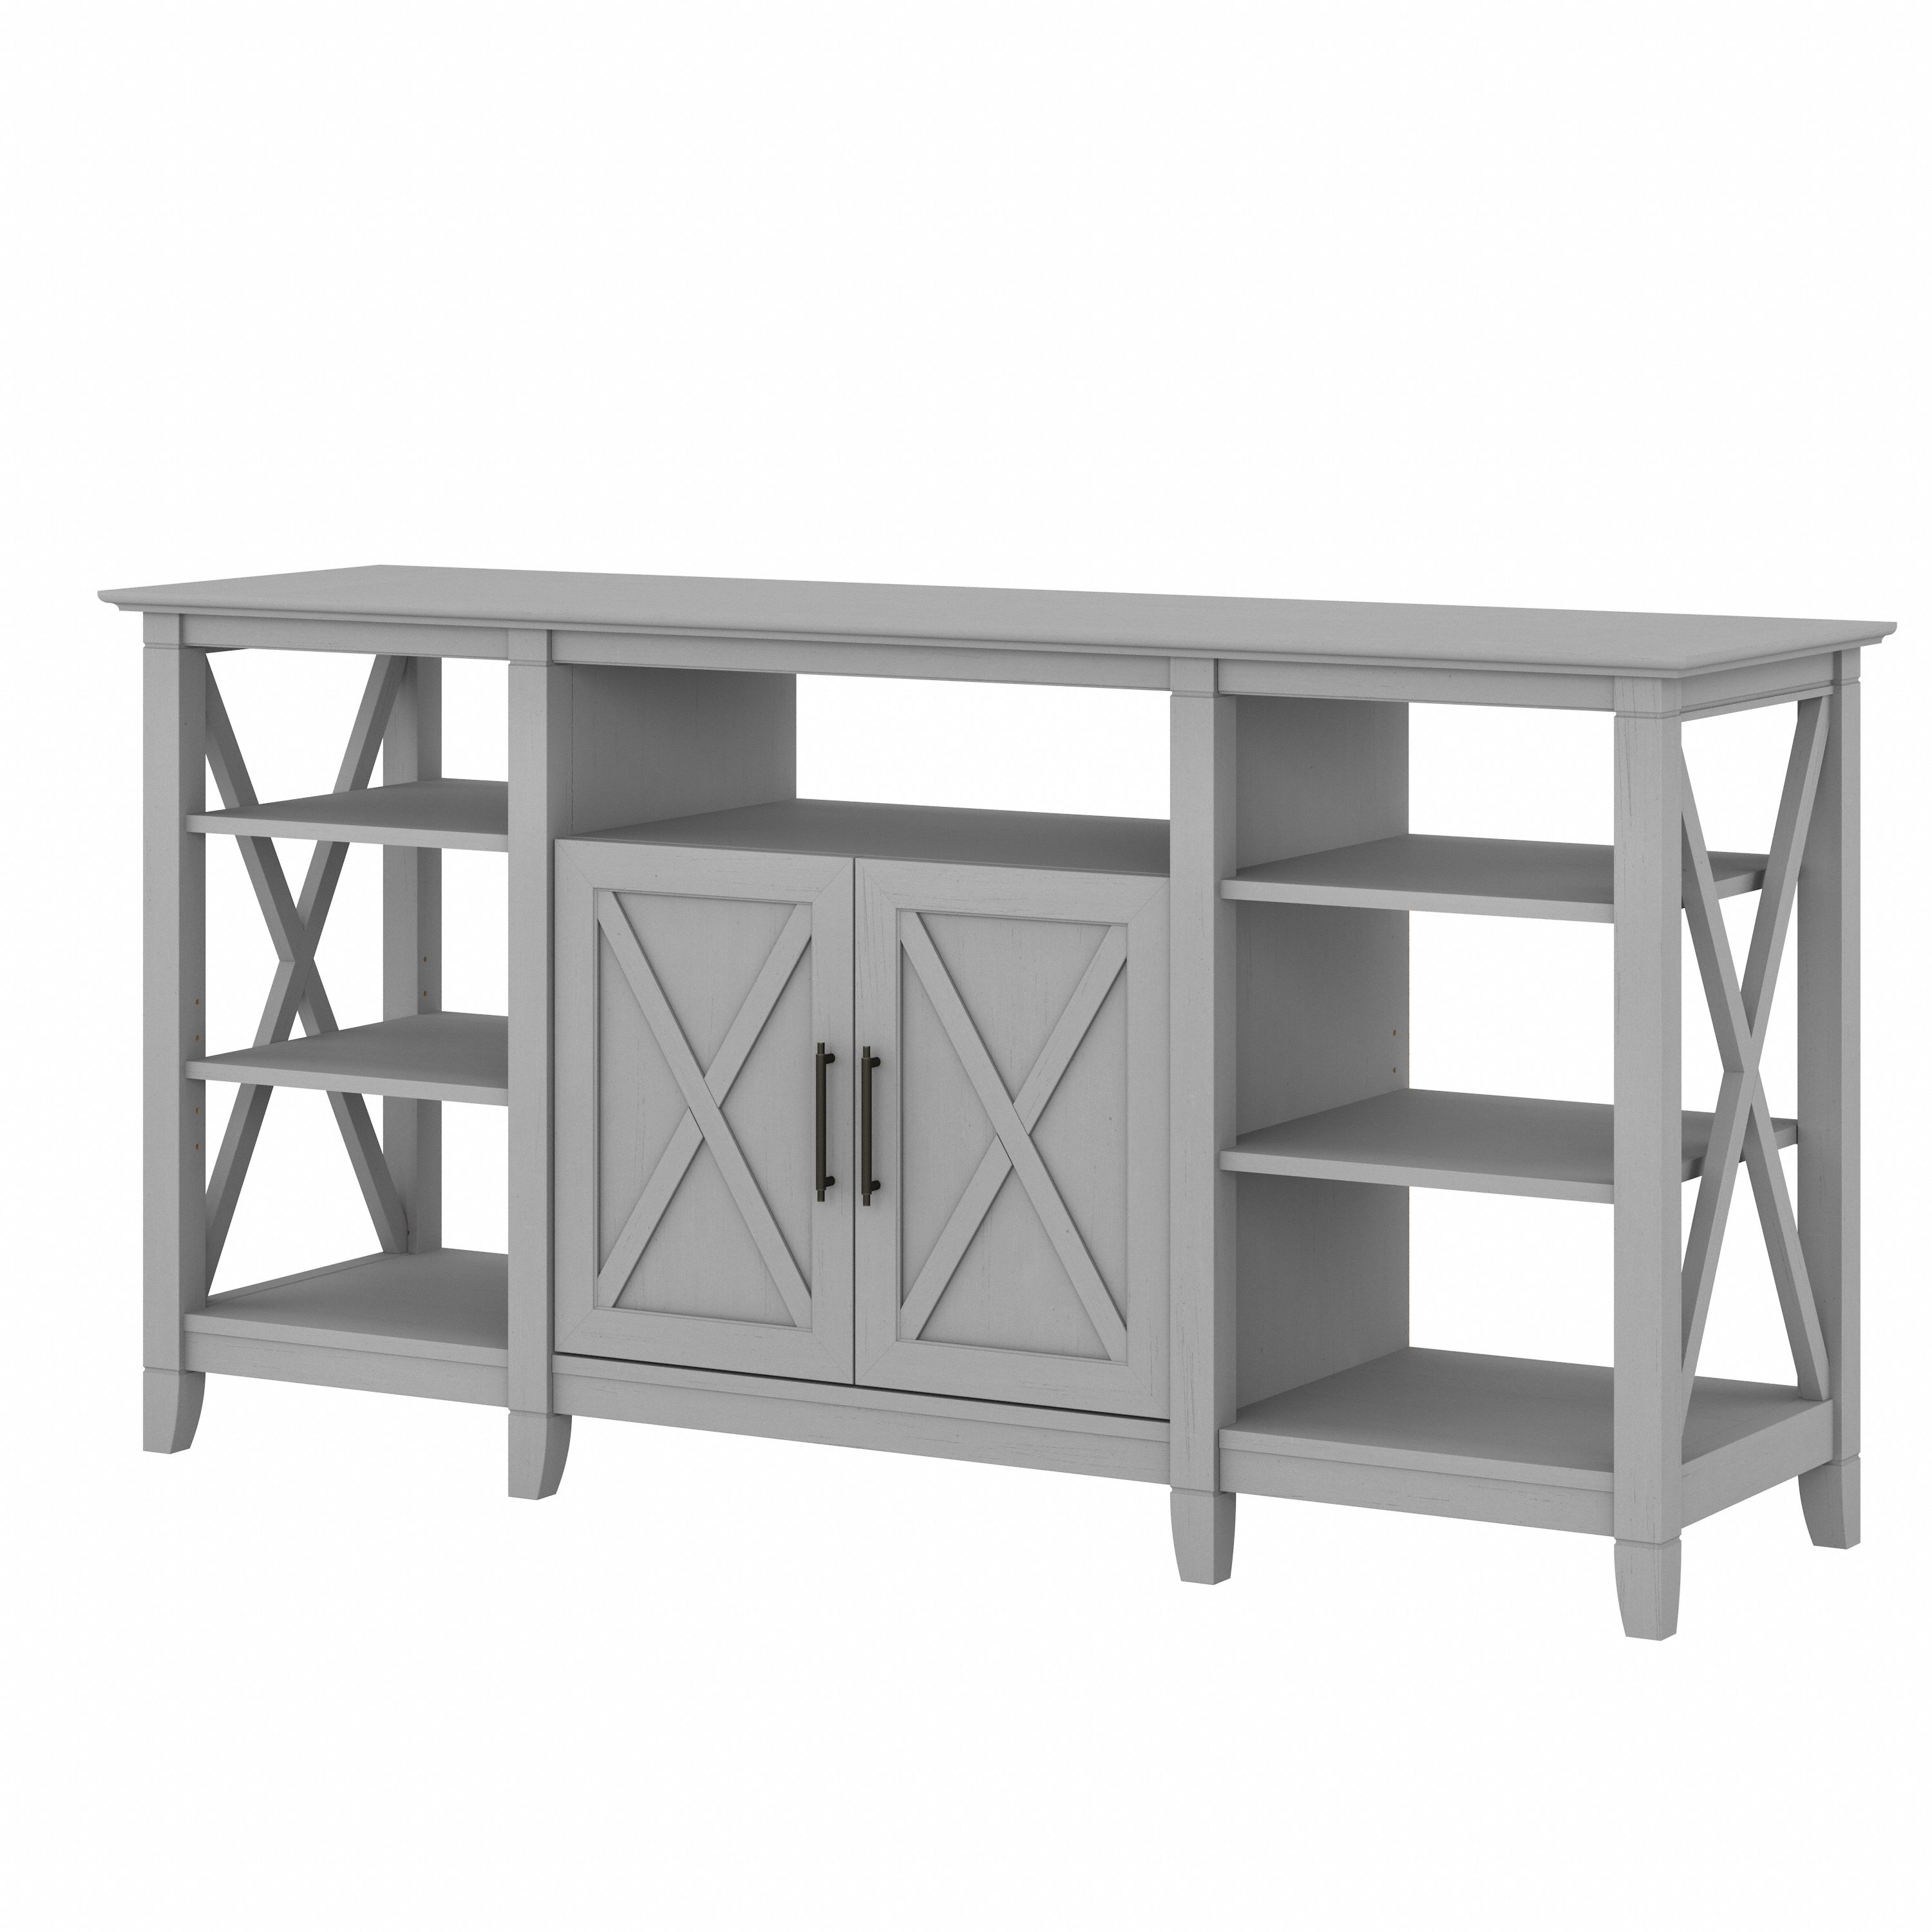 Shop Bush Furniture Key West Tall TV Stand for 65 Inch TV 02 KWV160CG-03 #color_cape cod gray